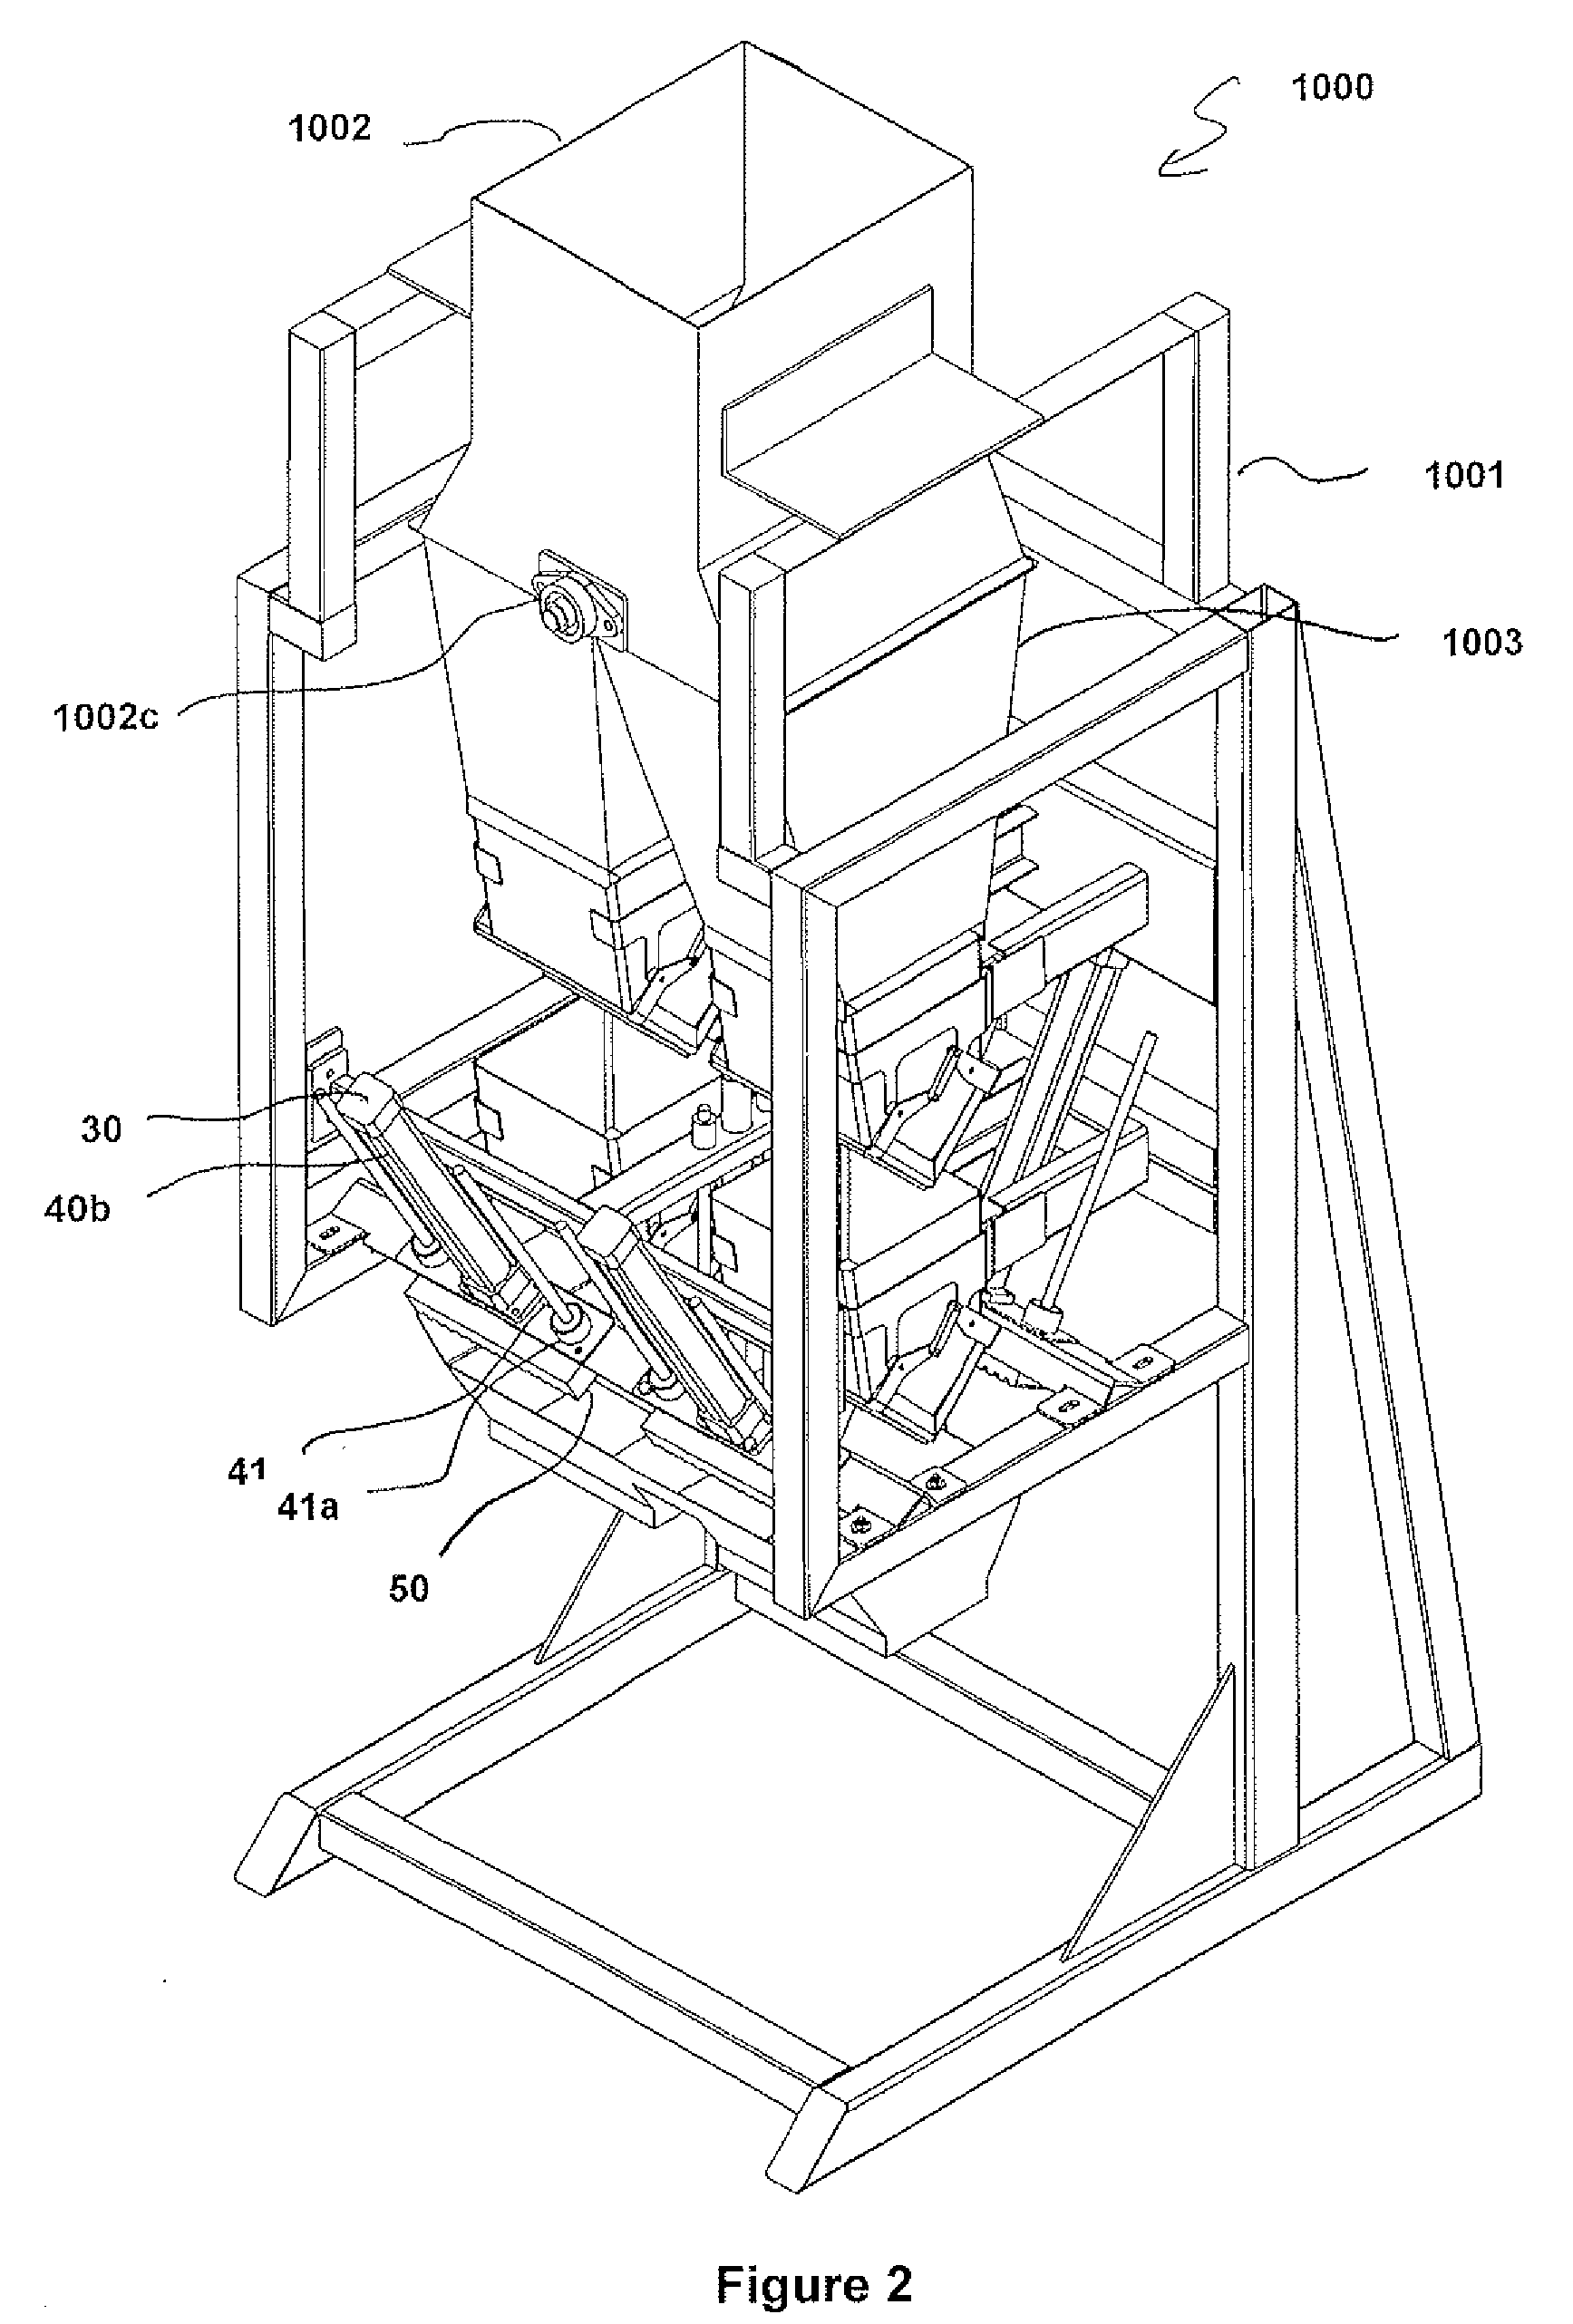 Apparatus for Packing Leafy Produce into a Tray